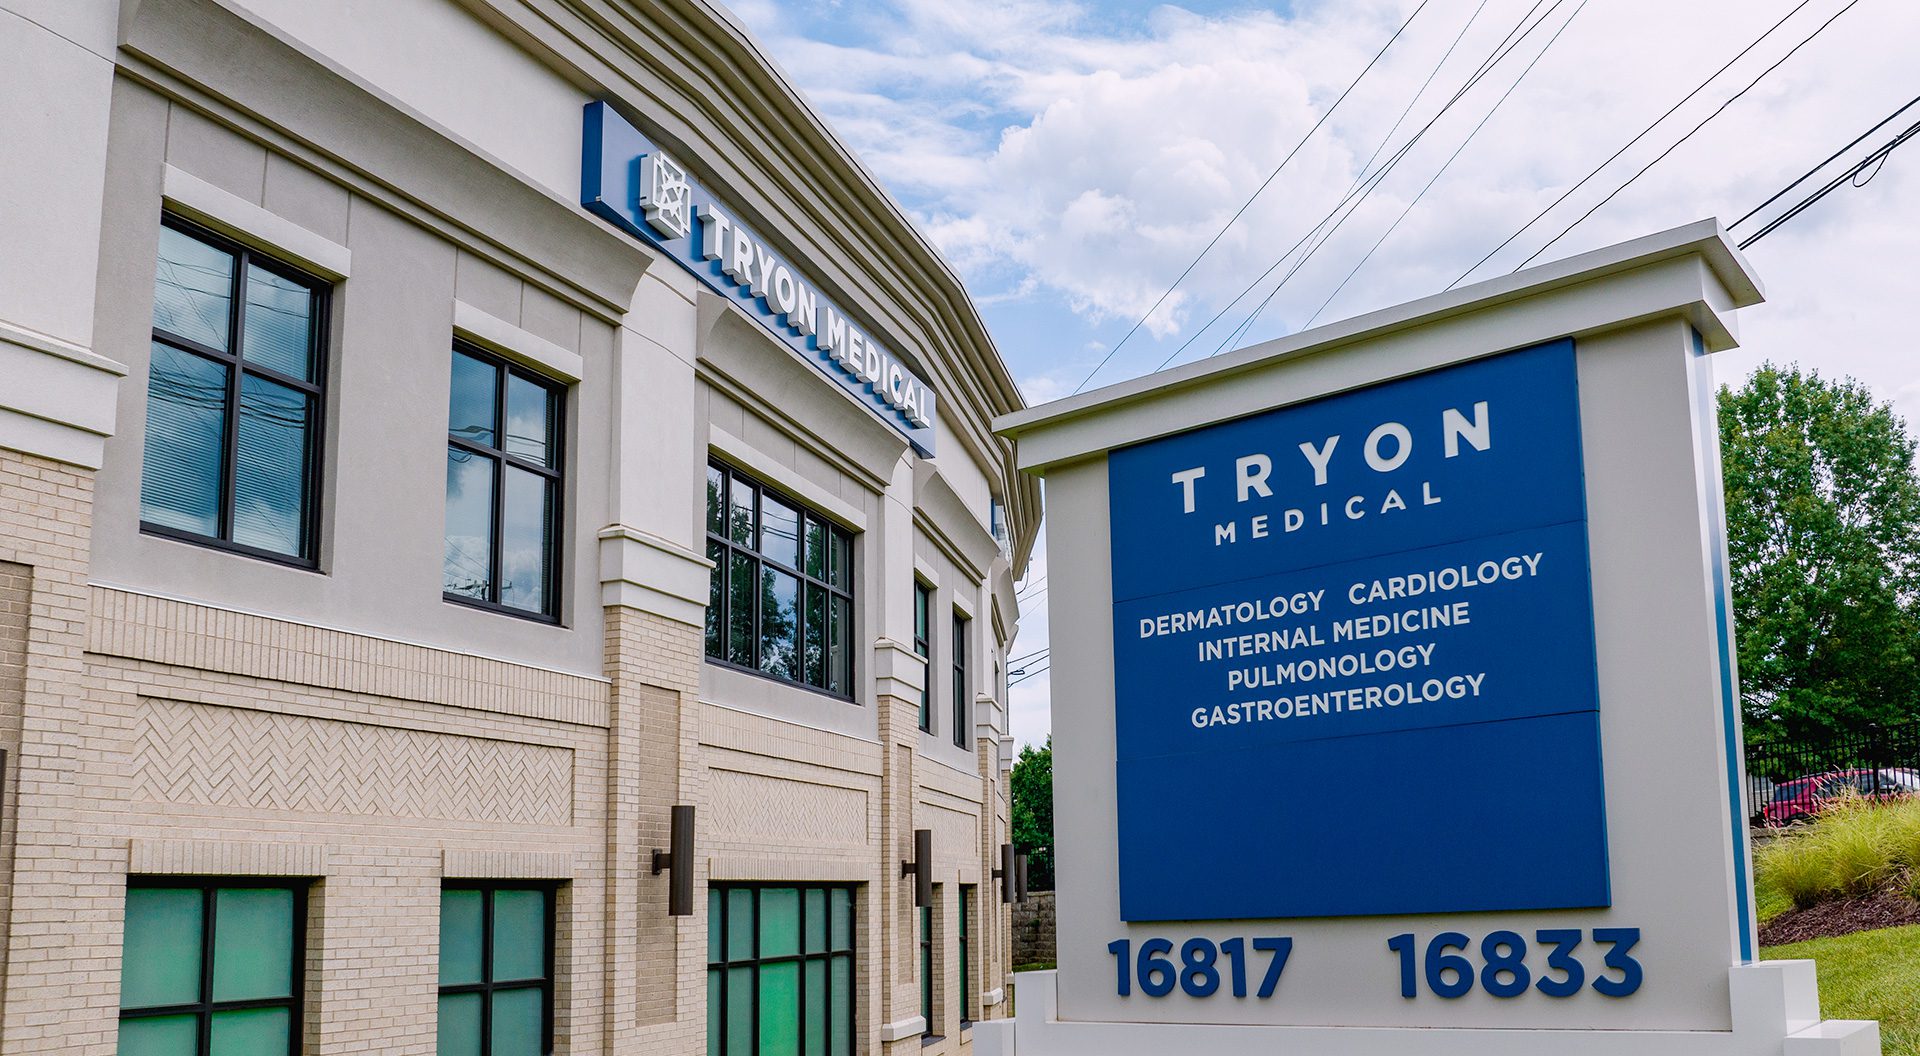 Tryon Medical Partners monument sign and exterior building at Marvin Crossing in Ballantyne